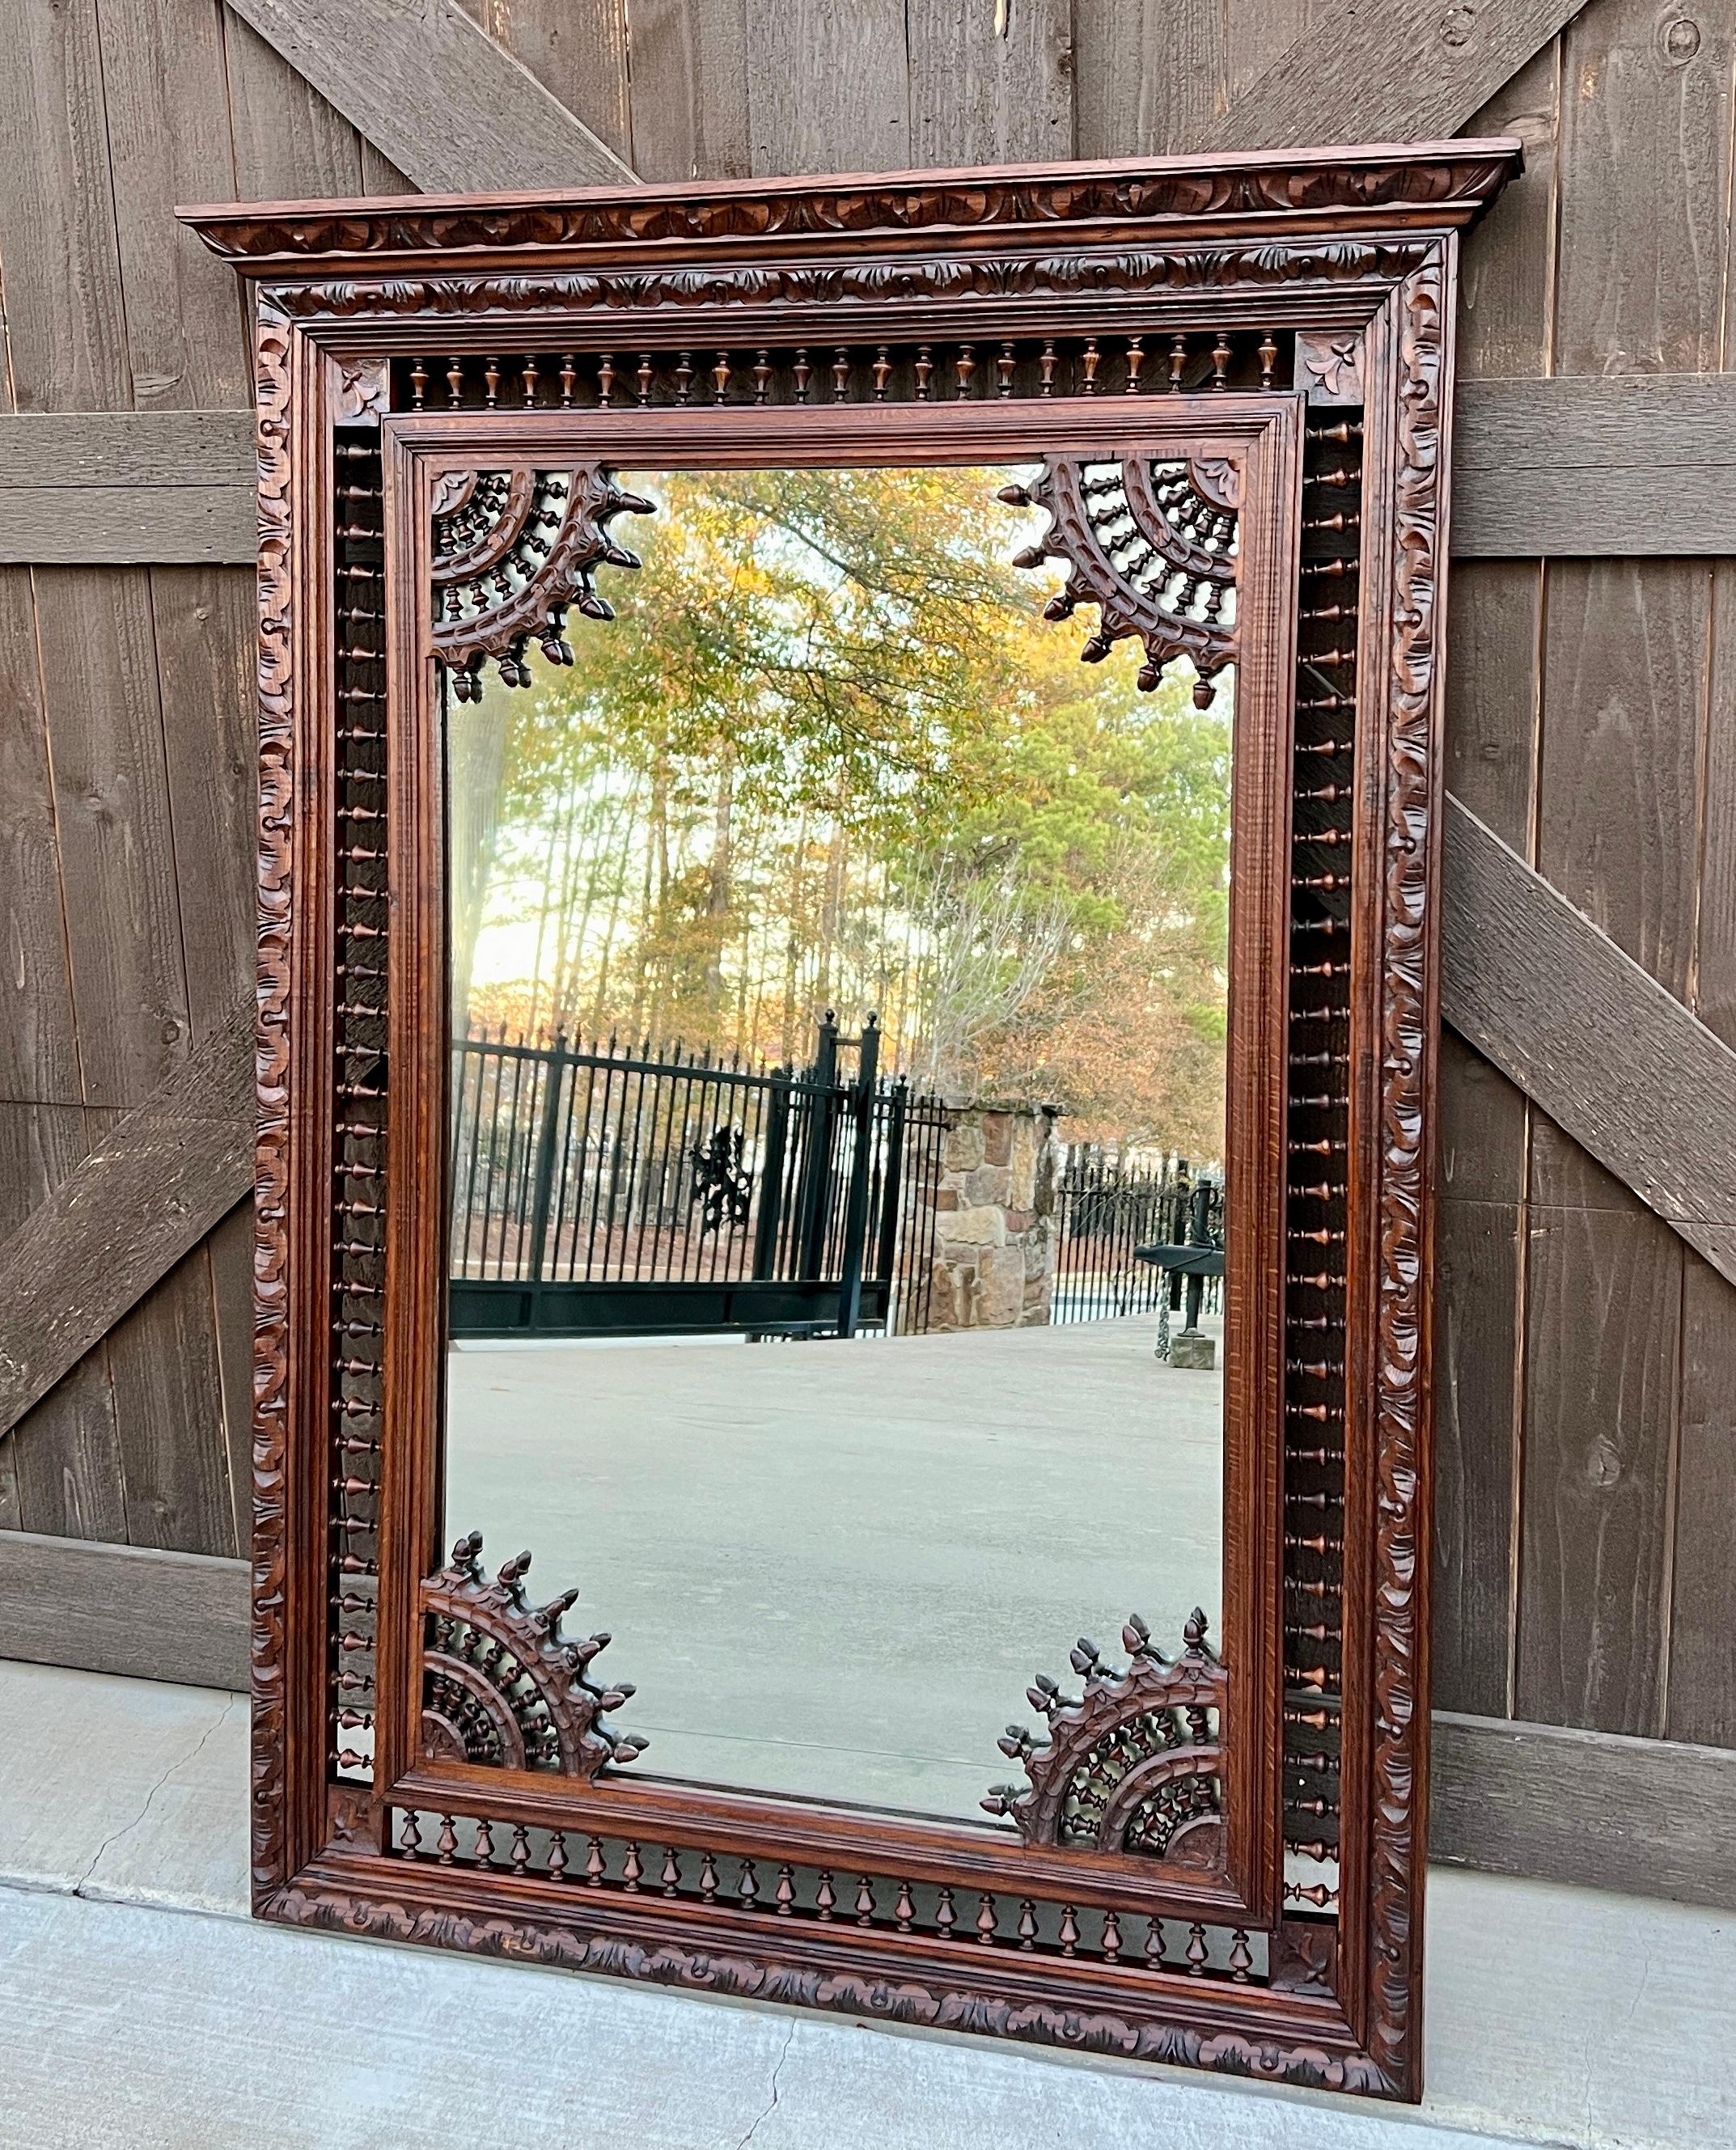 GORGEOUS Antique French Breton Rectangular Framed Oak Over Mantel Mirror ~~c. 1880s
 
Popular classic French hanging wall mirror~~beautifully carved with wood back~~perfect for a fireplace mantel, entry hall, living area, study, office, library,